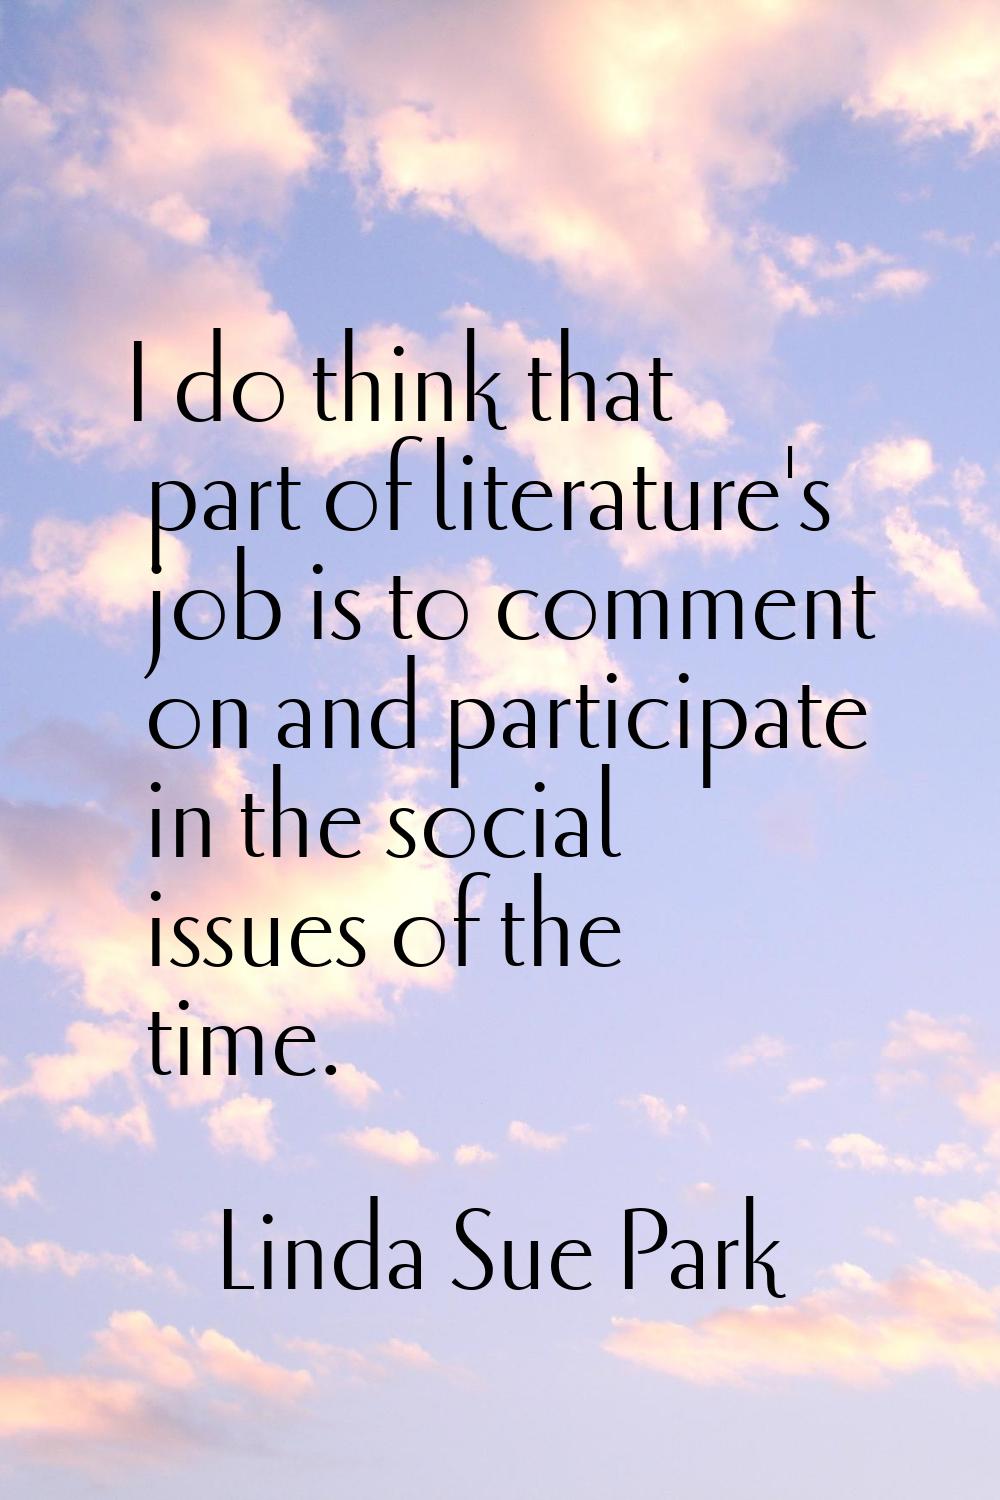 I do think that part of literature's job is to comment on and participate in the social issues of t